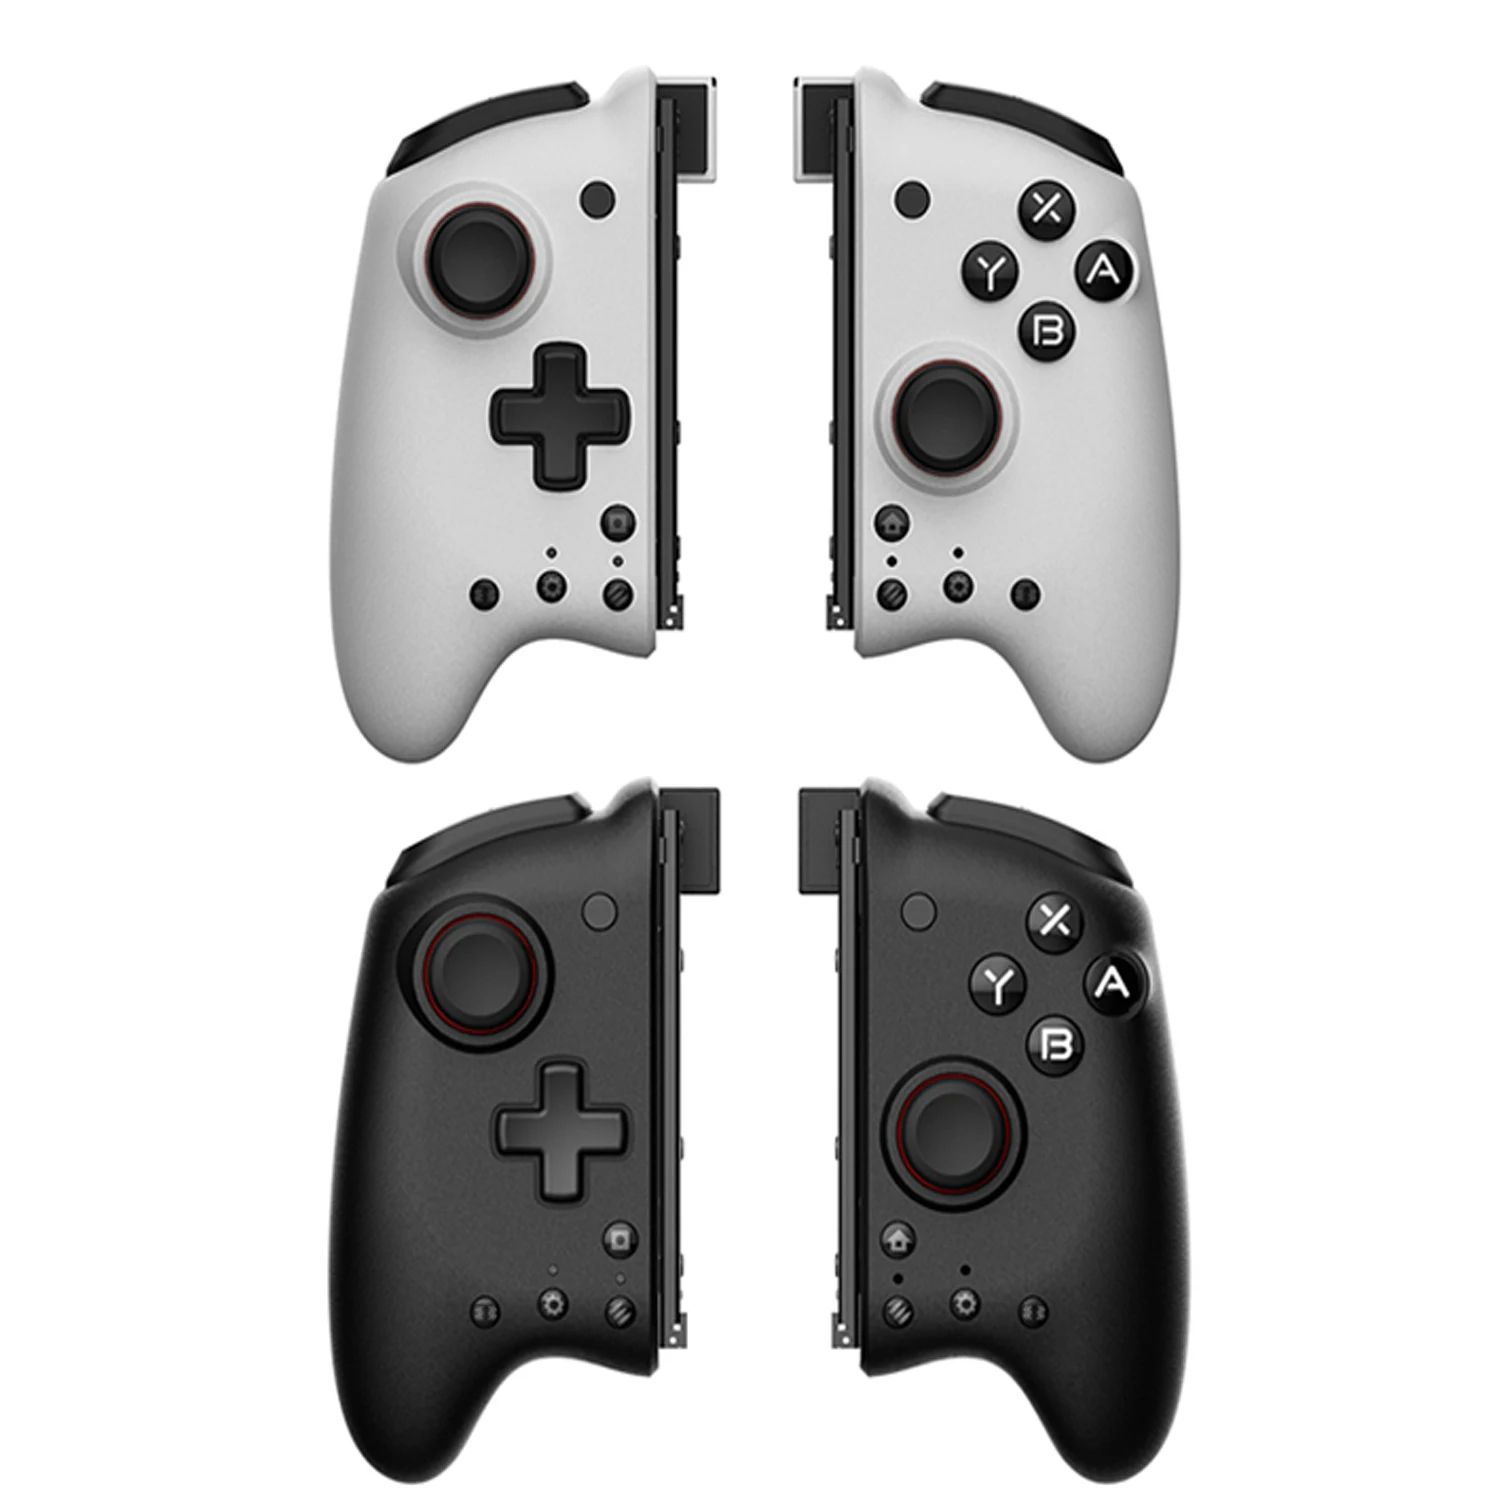 

NEW MOBAPAD M6 Gemini Game Console Controller for Nintendo Switch Joypad Left Right Handle Grip for Nintend Switch OLED Gamepad